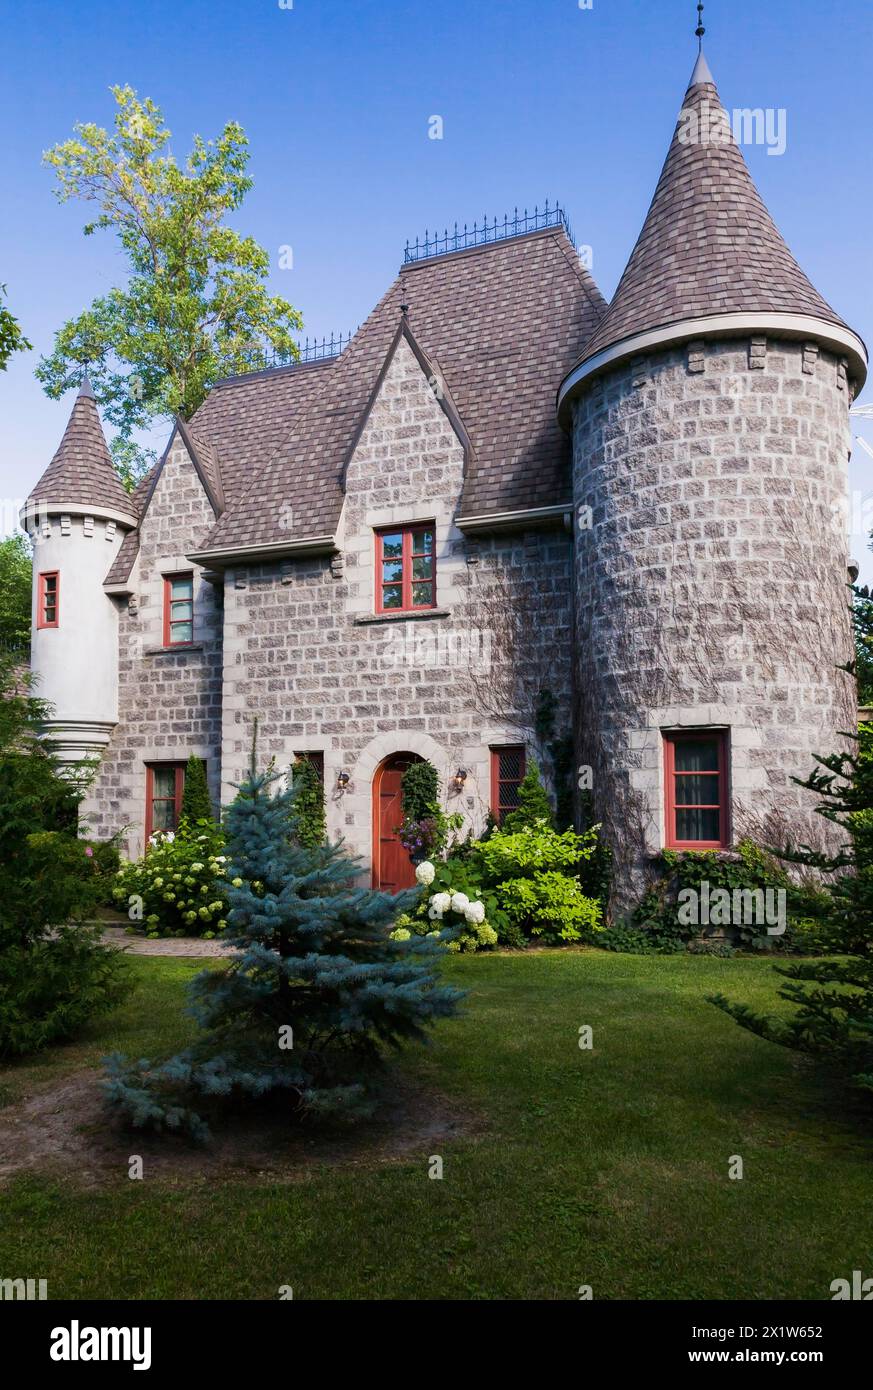 2006 reproduction of a 16th century grey stone and mortar Renaissance castle style residential home facade in summer, Quebec, Canada Stock Photo